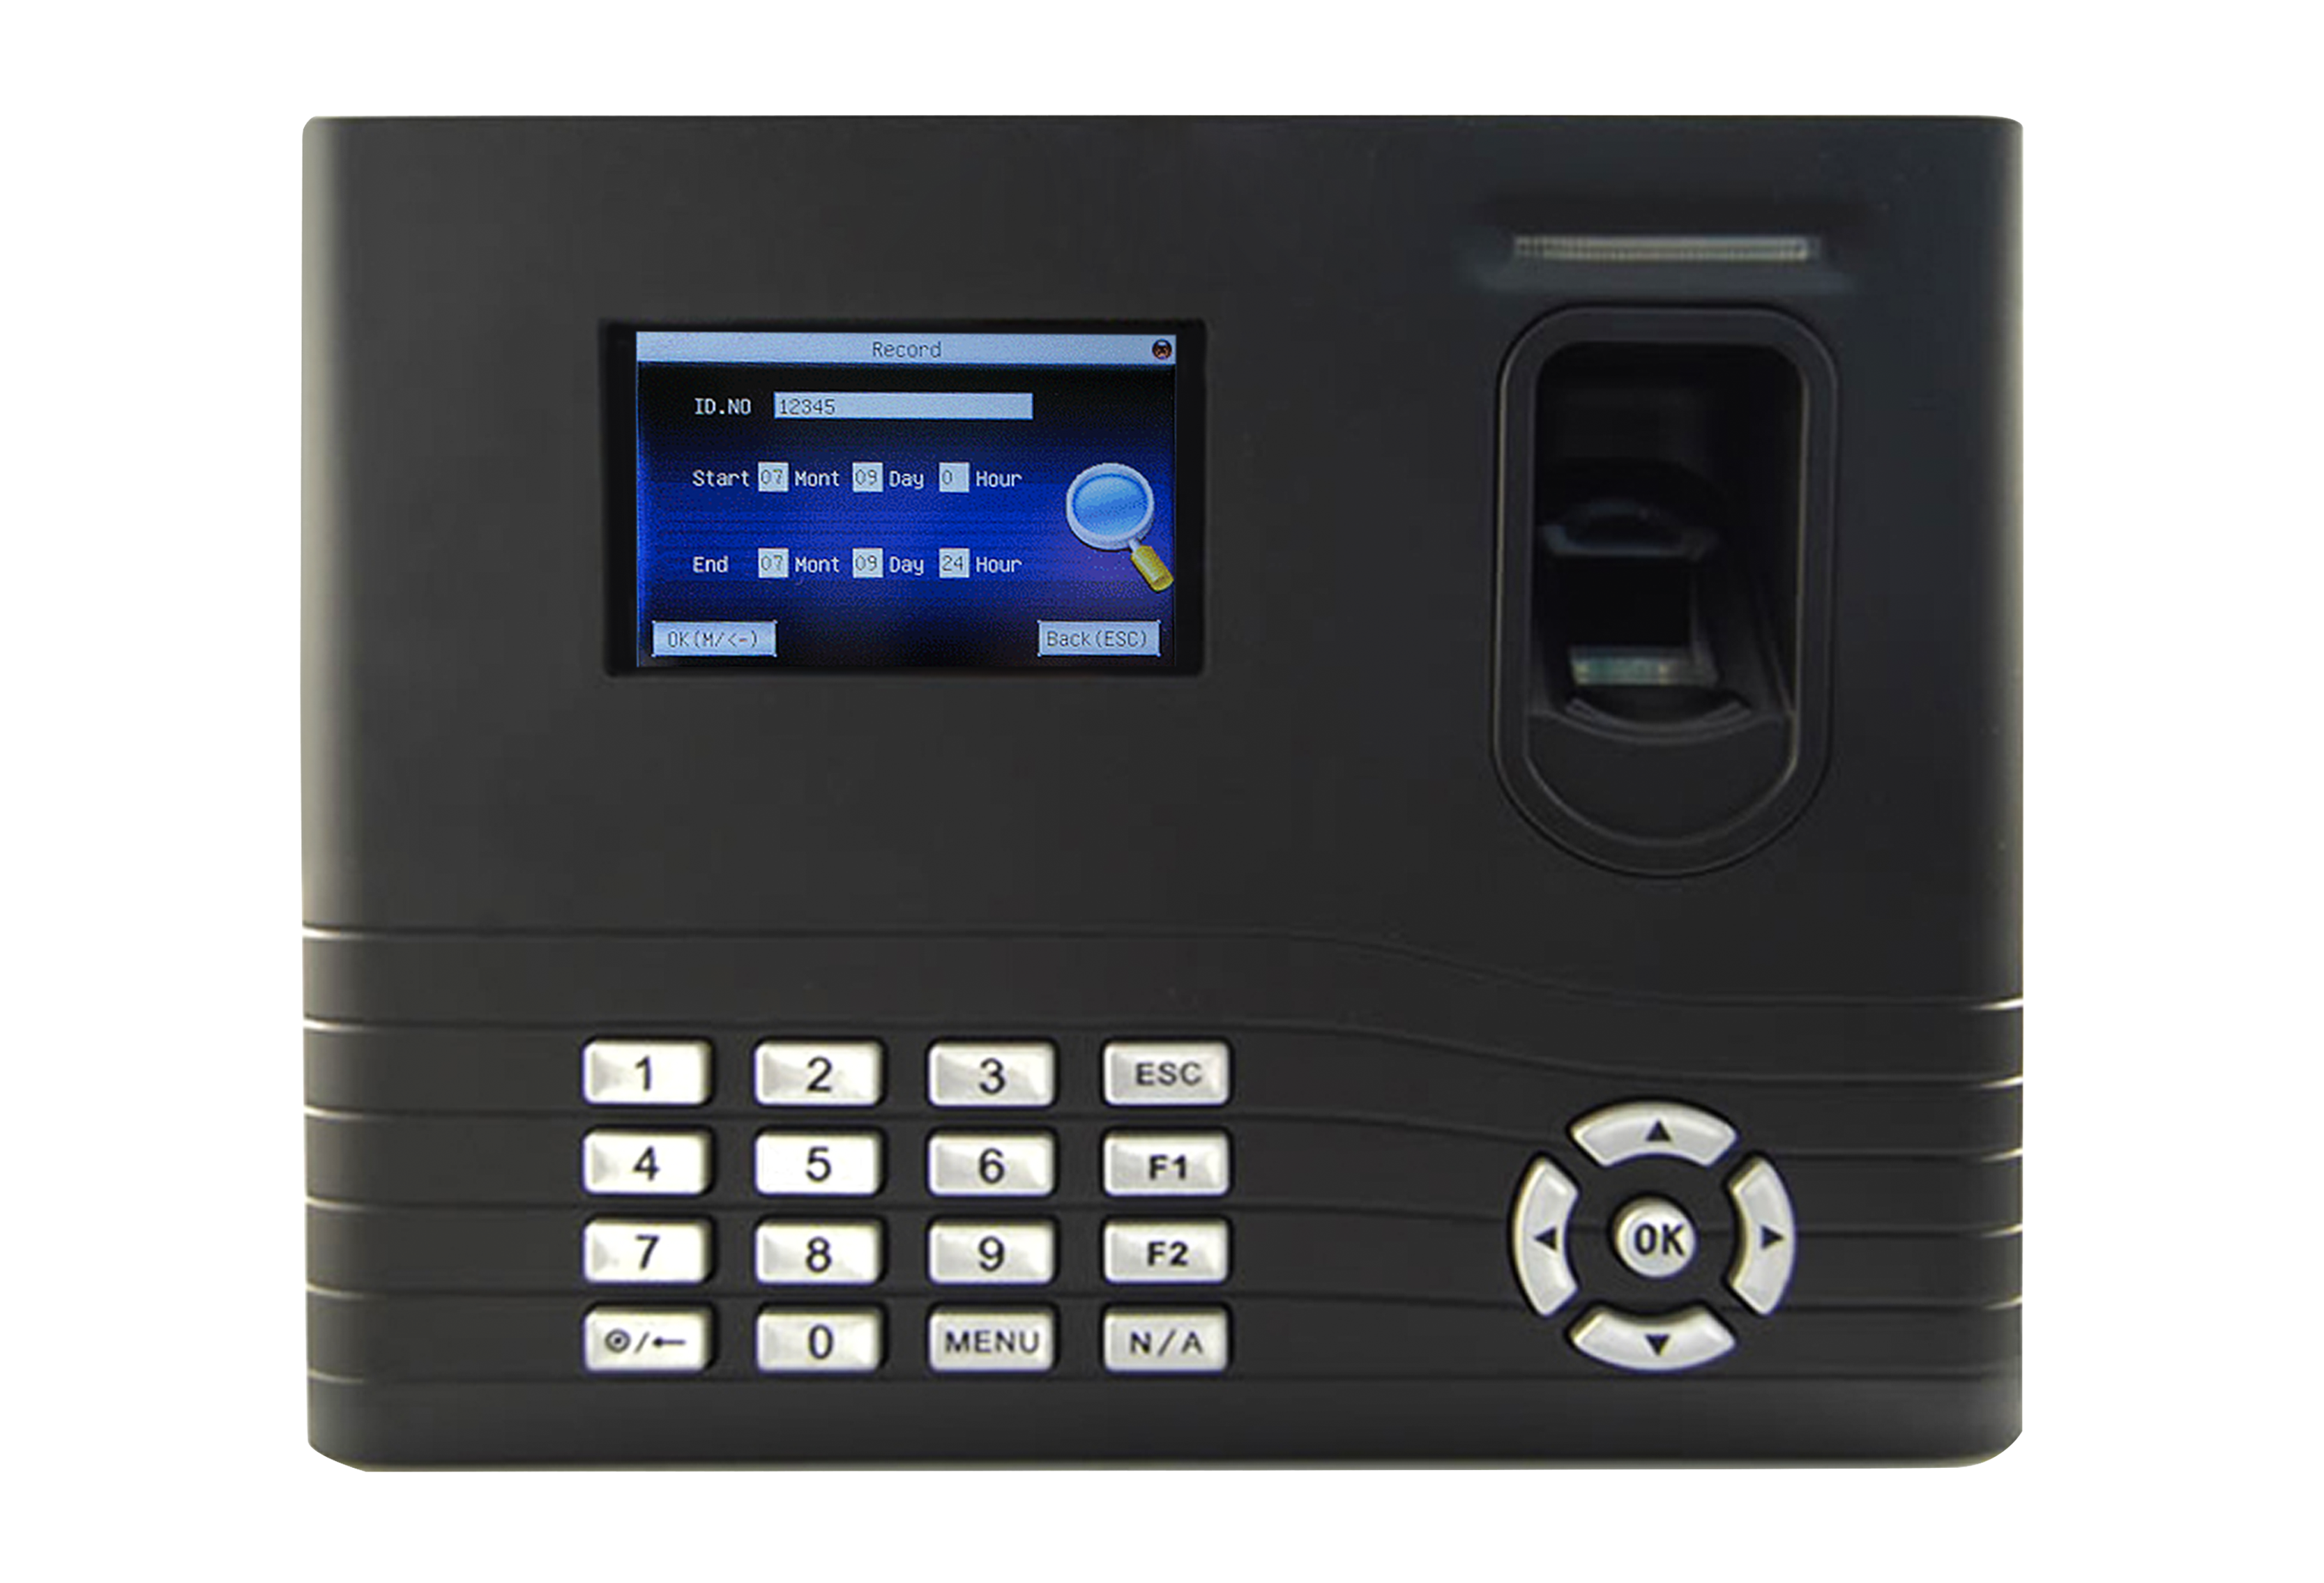 biometric time attendance systems